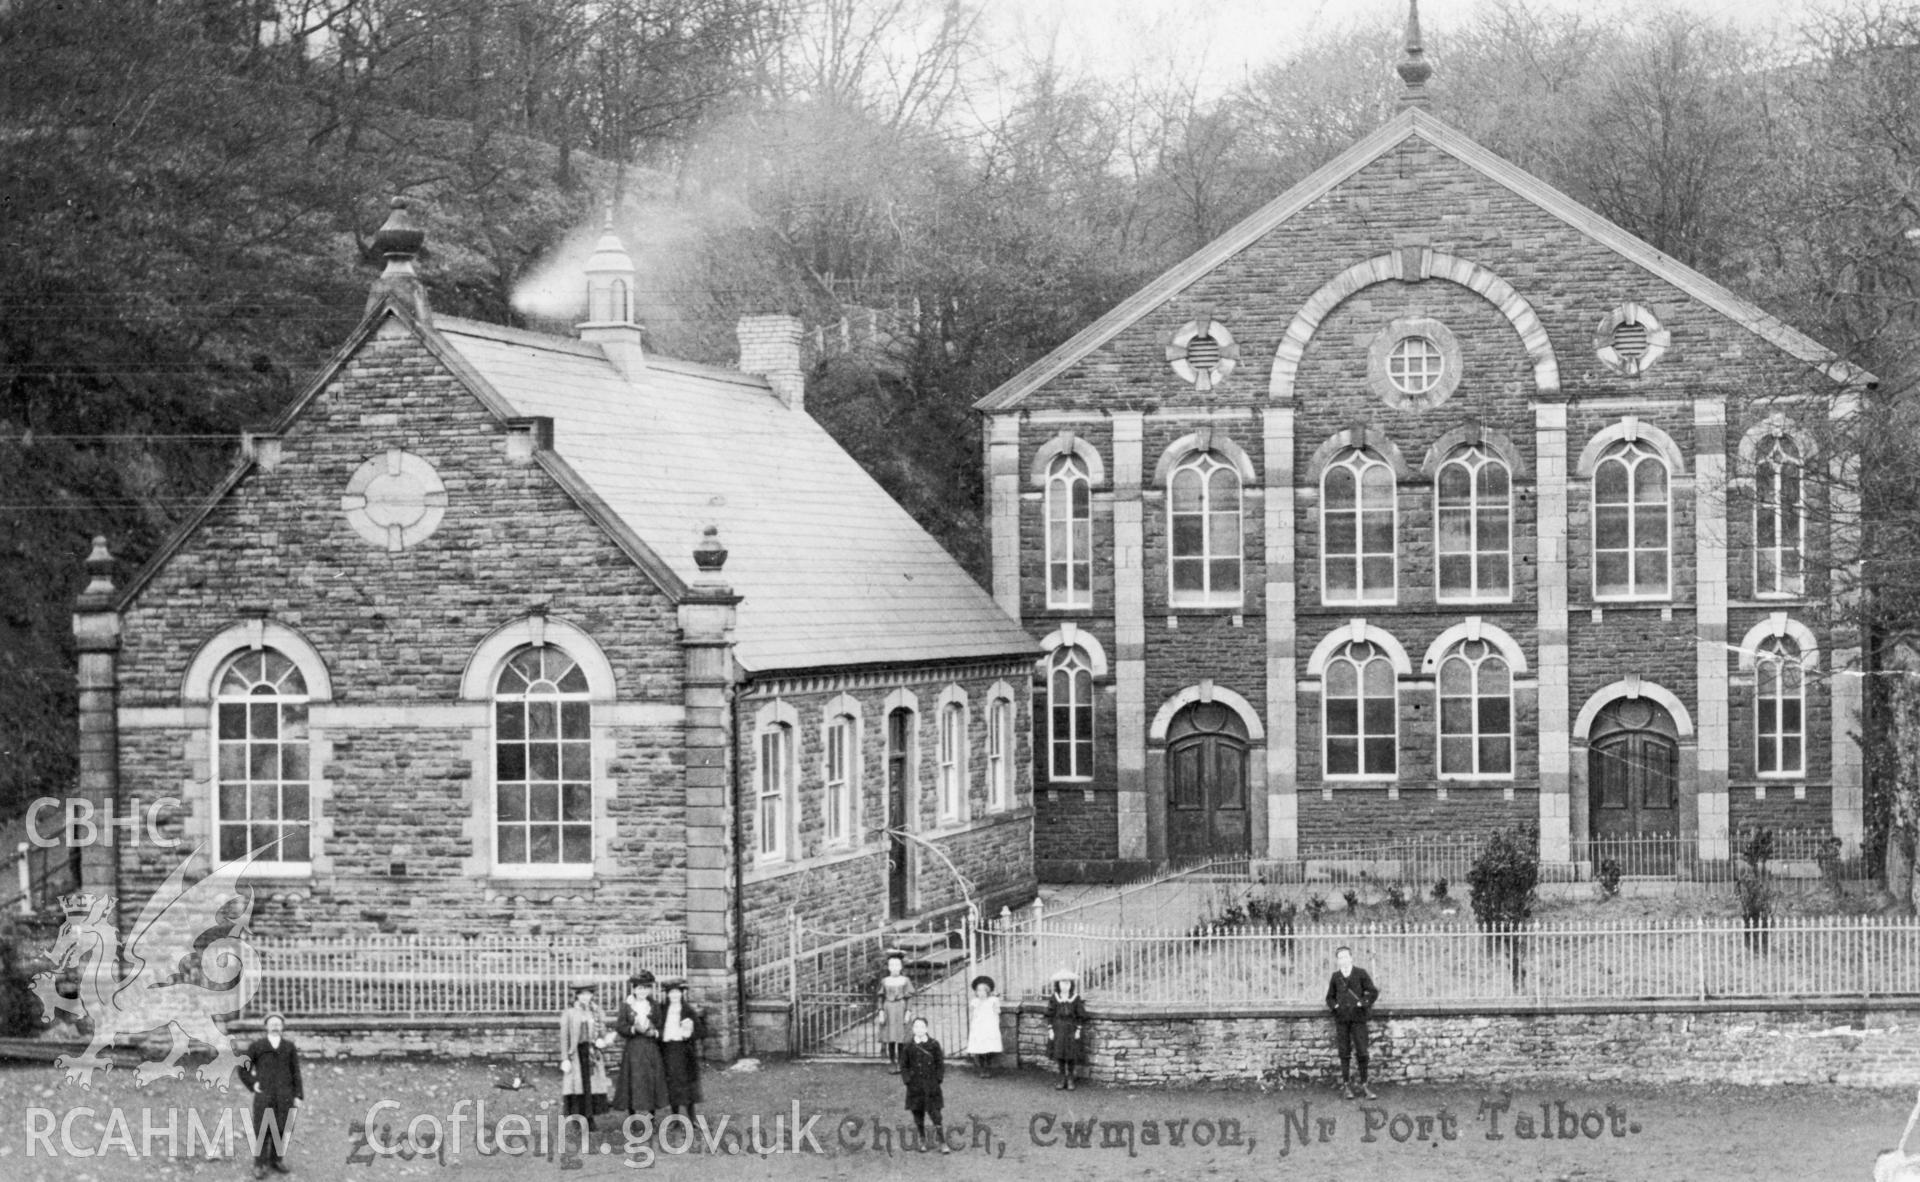 Black and white print of Zion Congregational Church, Cwmavon, copied from a postcard loaned by Thomas Lloyd.